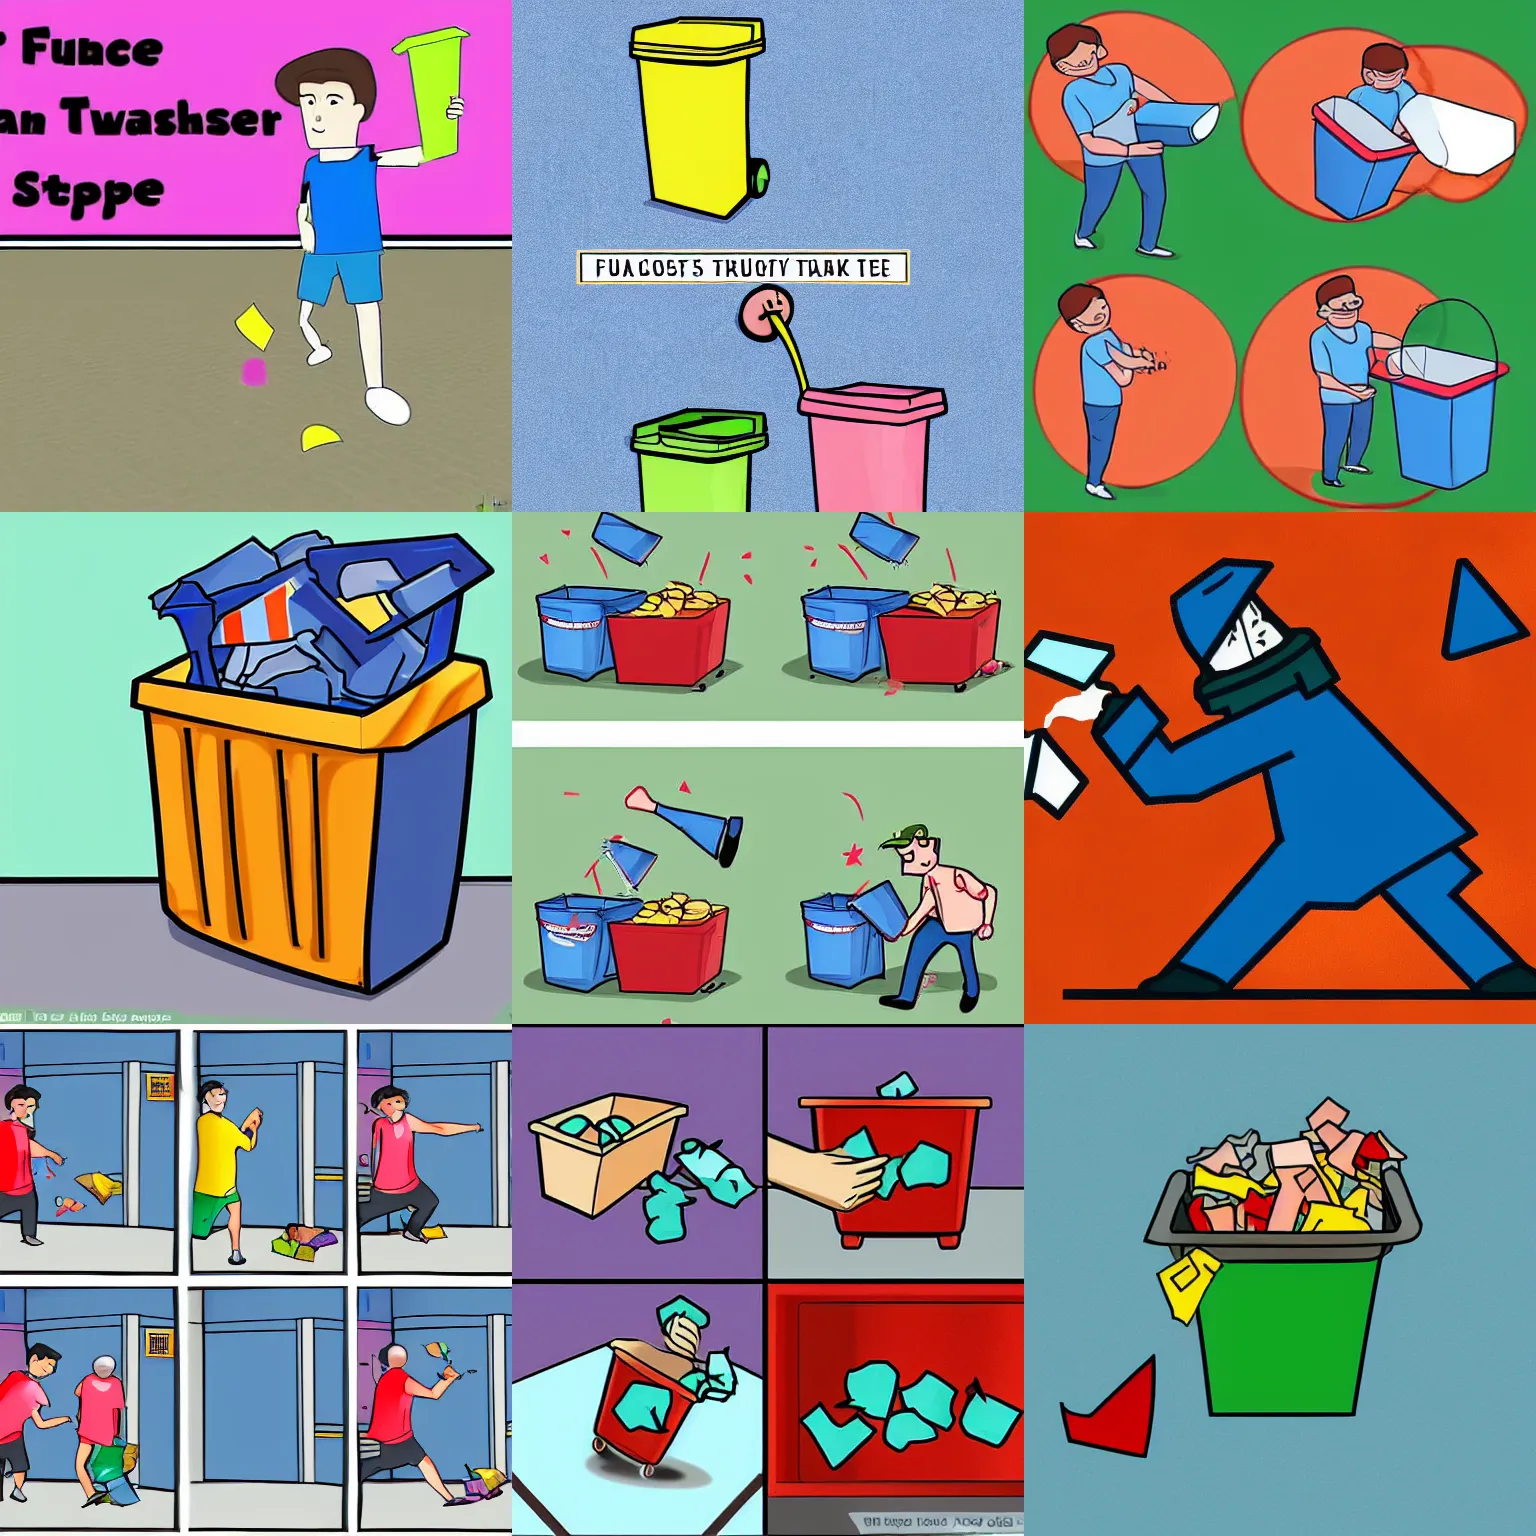 Prompt: figure throwing trash in container, step-by-step guide, how to, cartoon